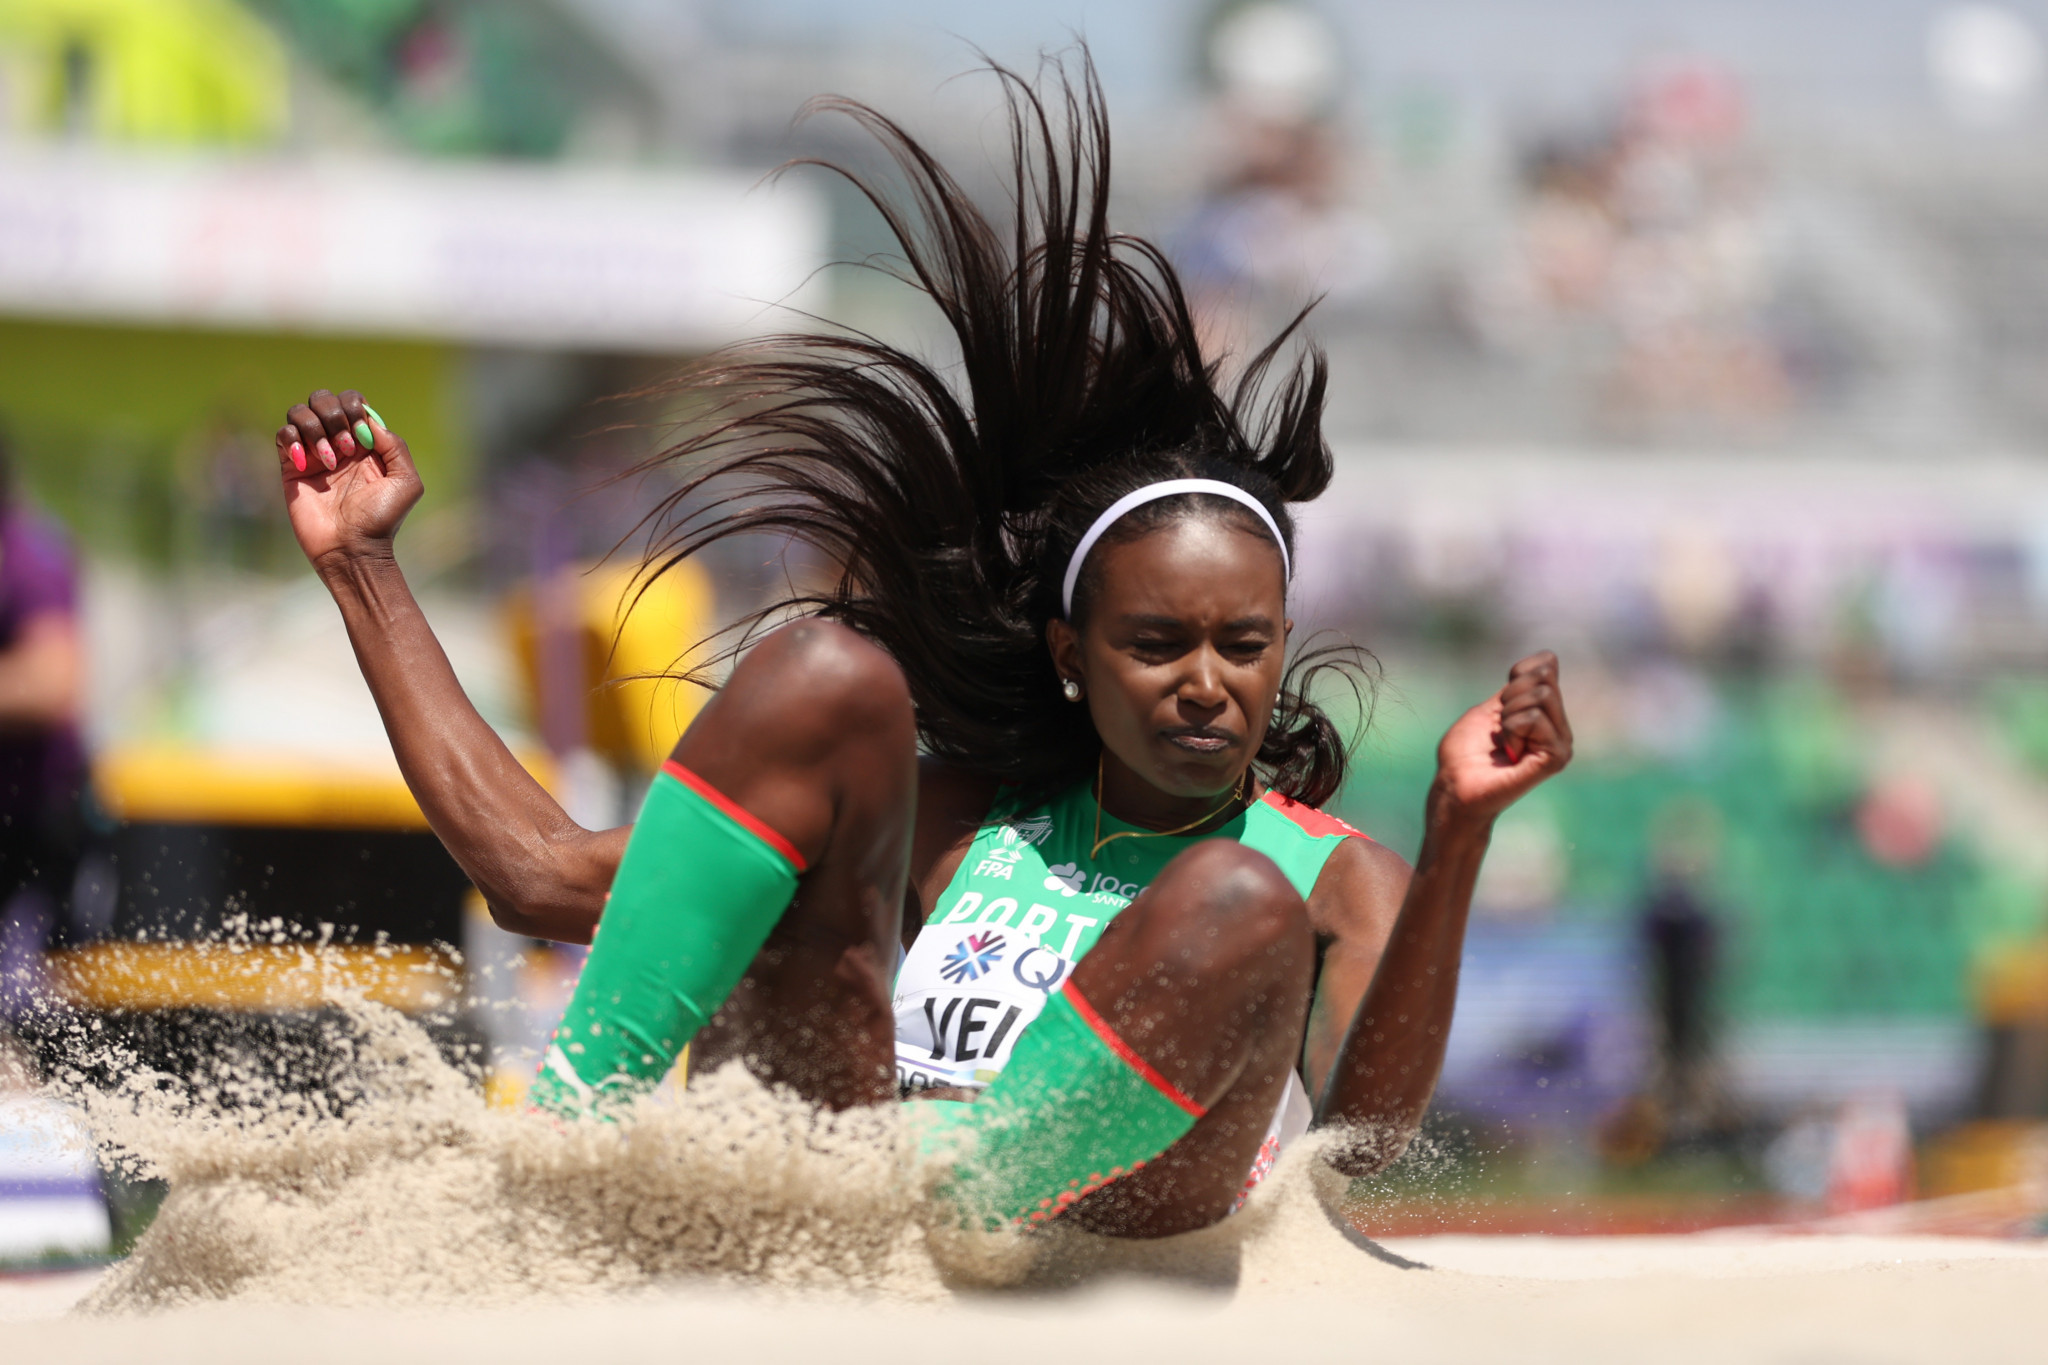 Evelise Veiga of Portugal in action in women's long jump qualification ©Getty Images